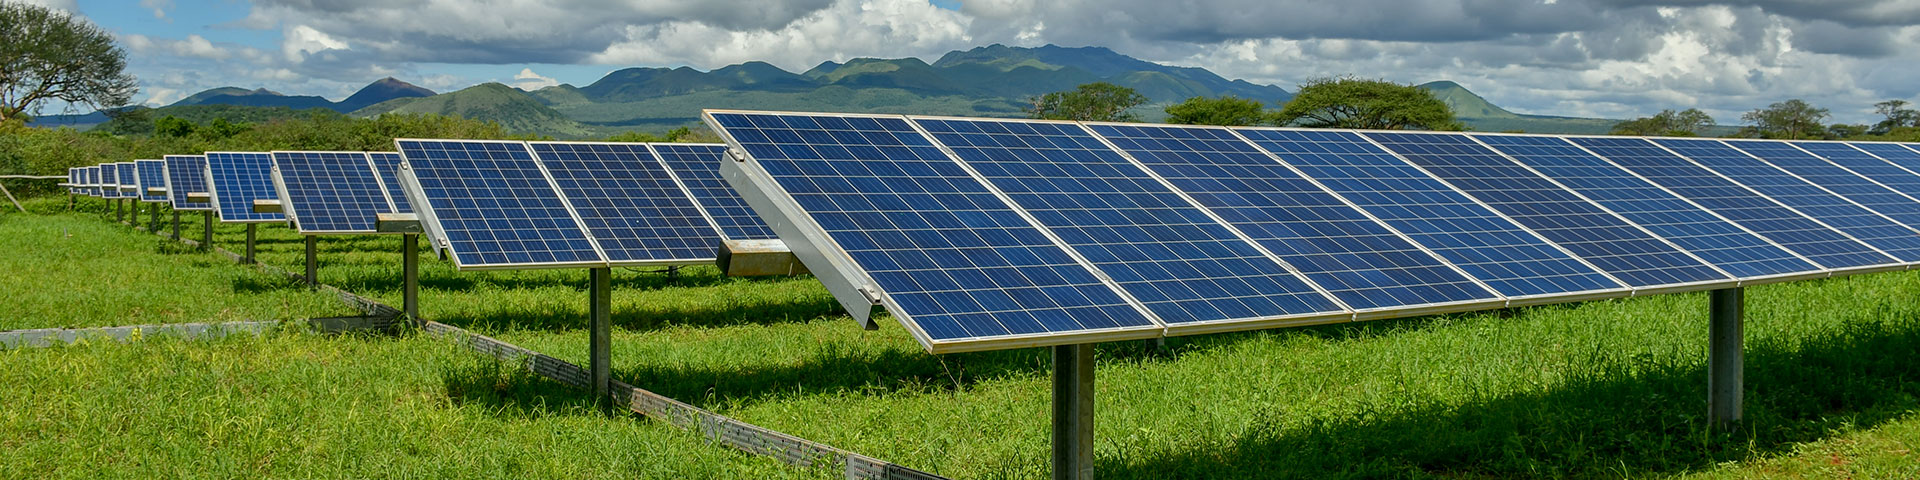 Solar panels on a green meadow